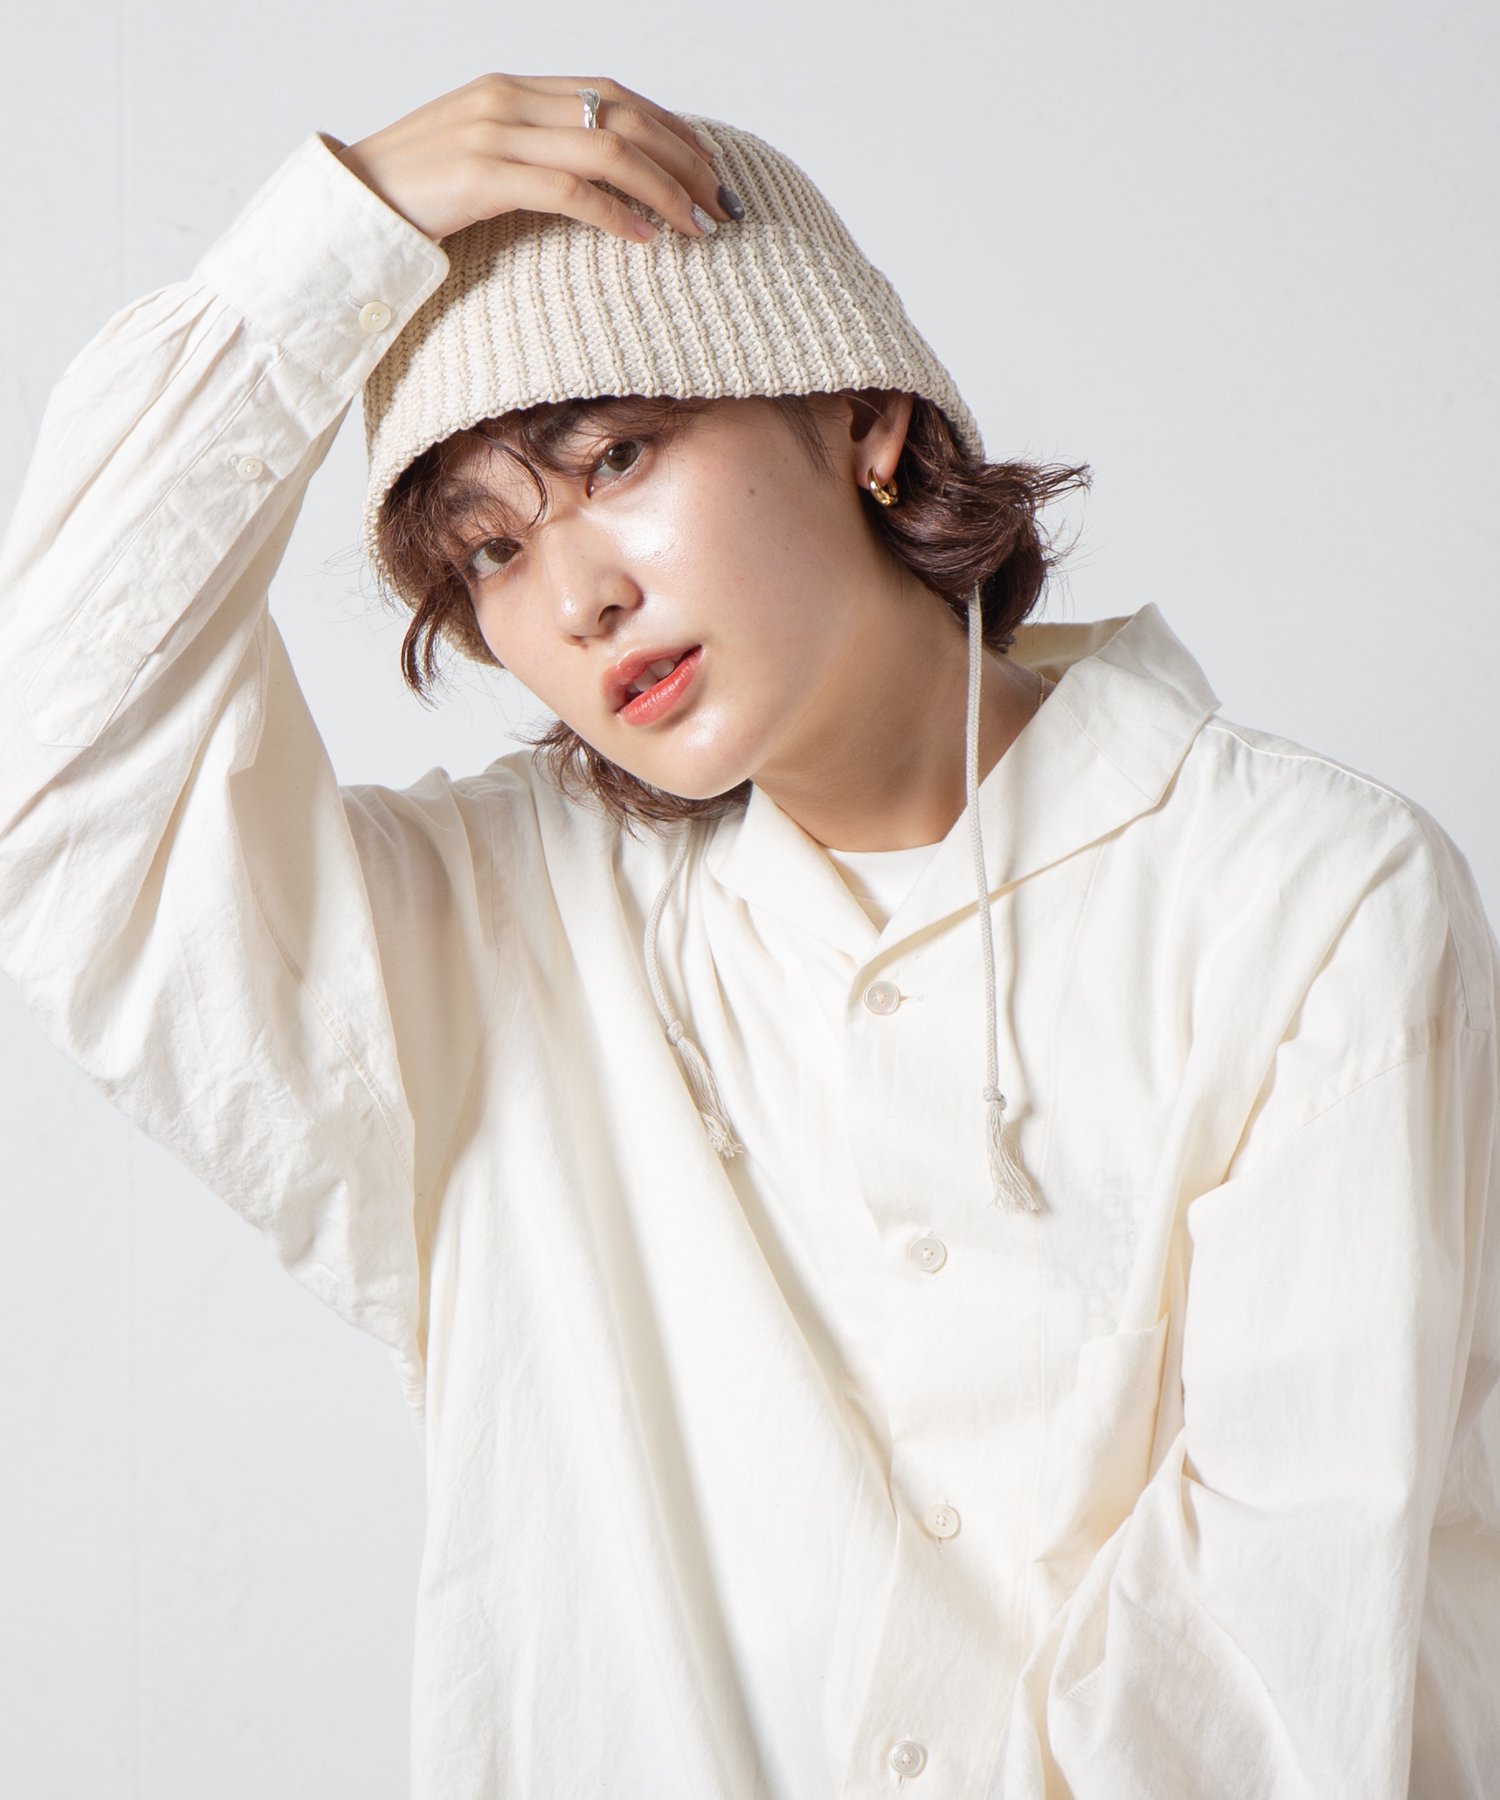 <img class='new_mark_img1' src='https://img.shop-pro.jp/img/new/icons15.gif' style='border:none;display:inline;margin:0px;padding:0px;width:auto;' />【Taji x Ray's Store】 Cord Knit Hat / タジ×レイズストア　コードニットハット
